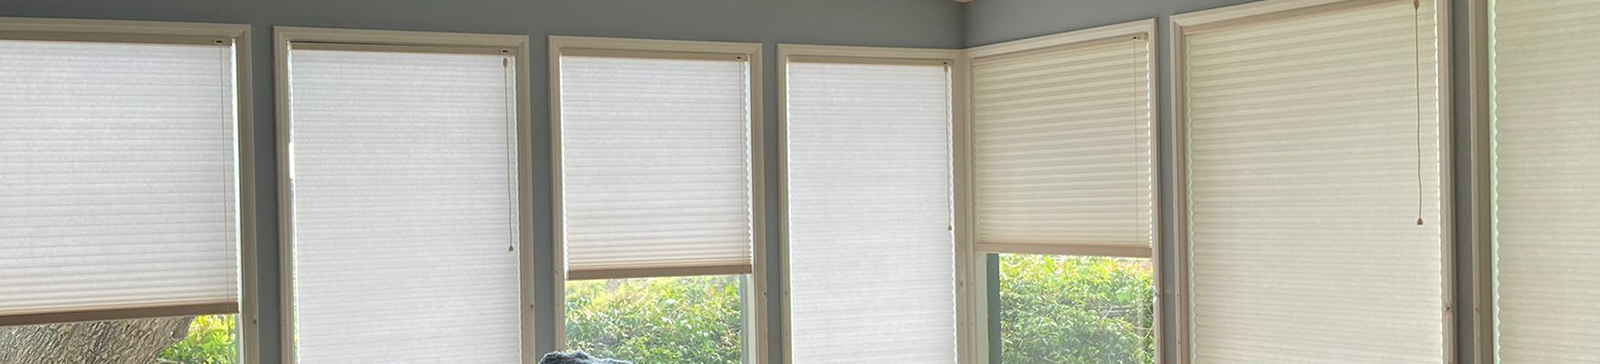 Cellular Window Shades for Living Room in Alamo